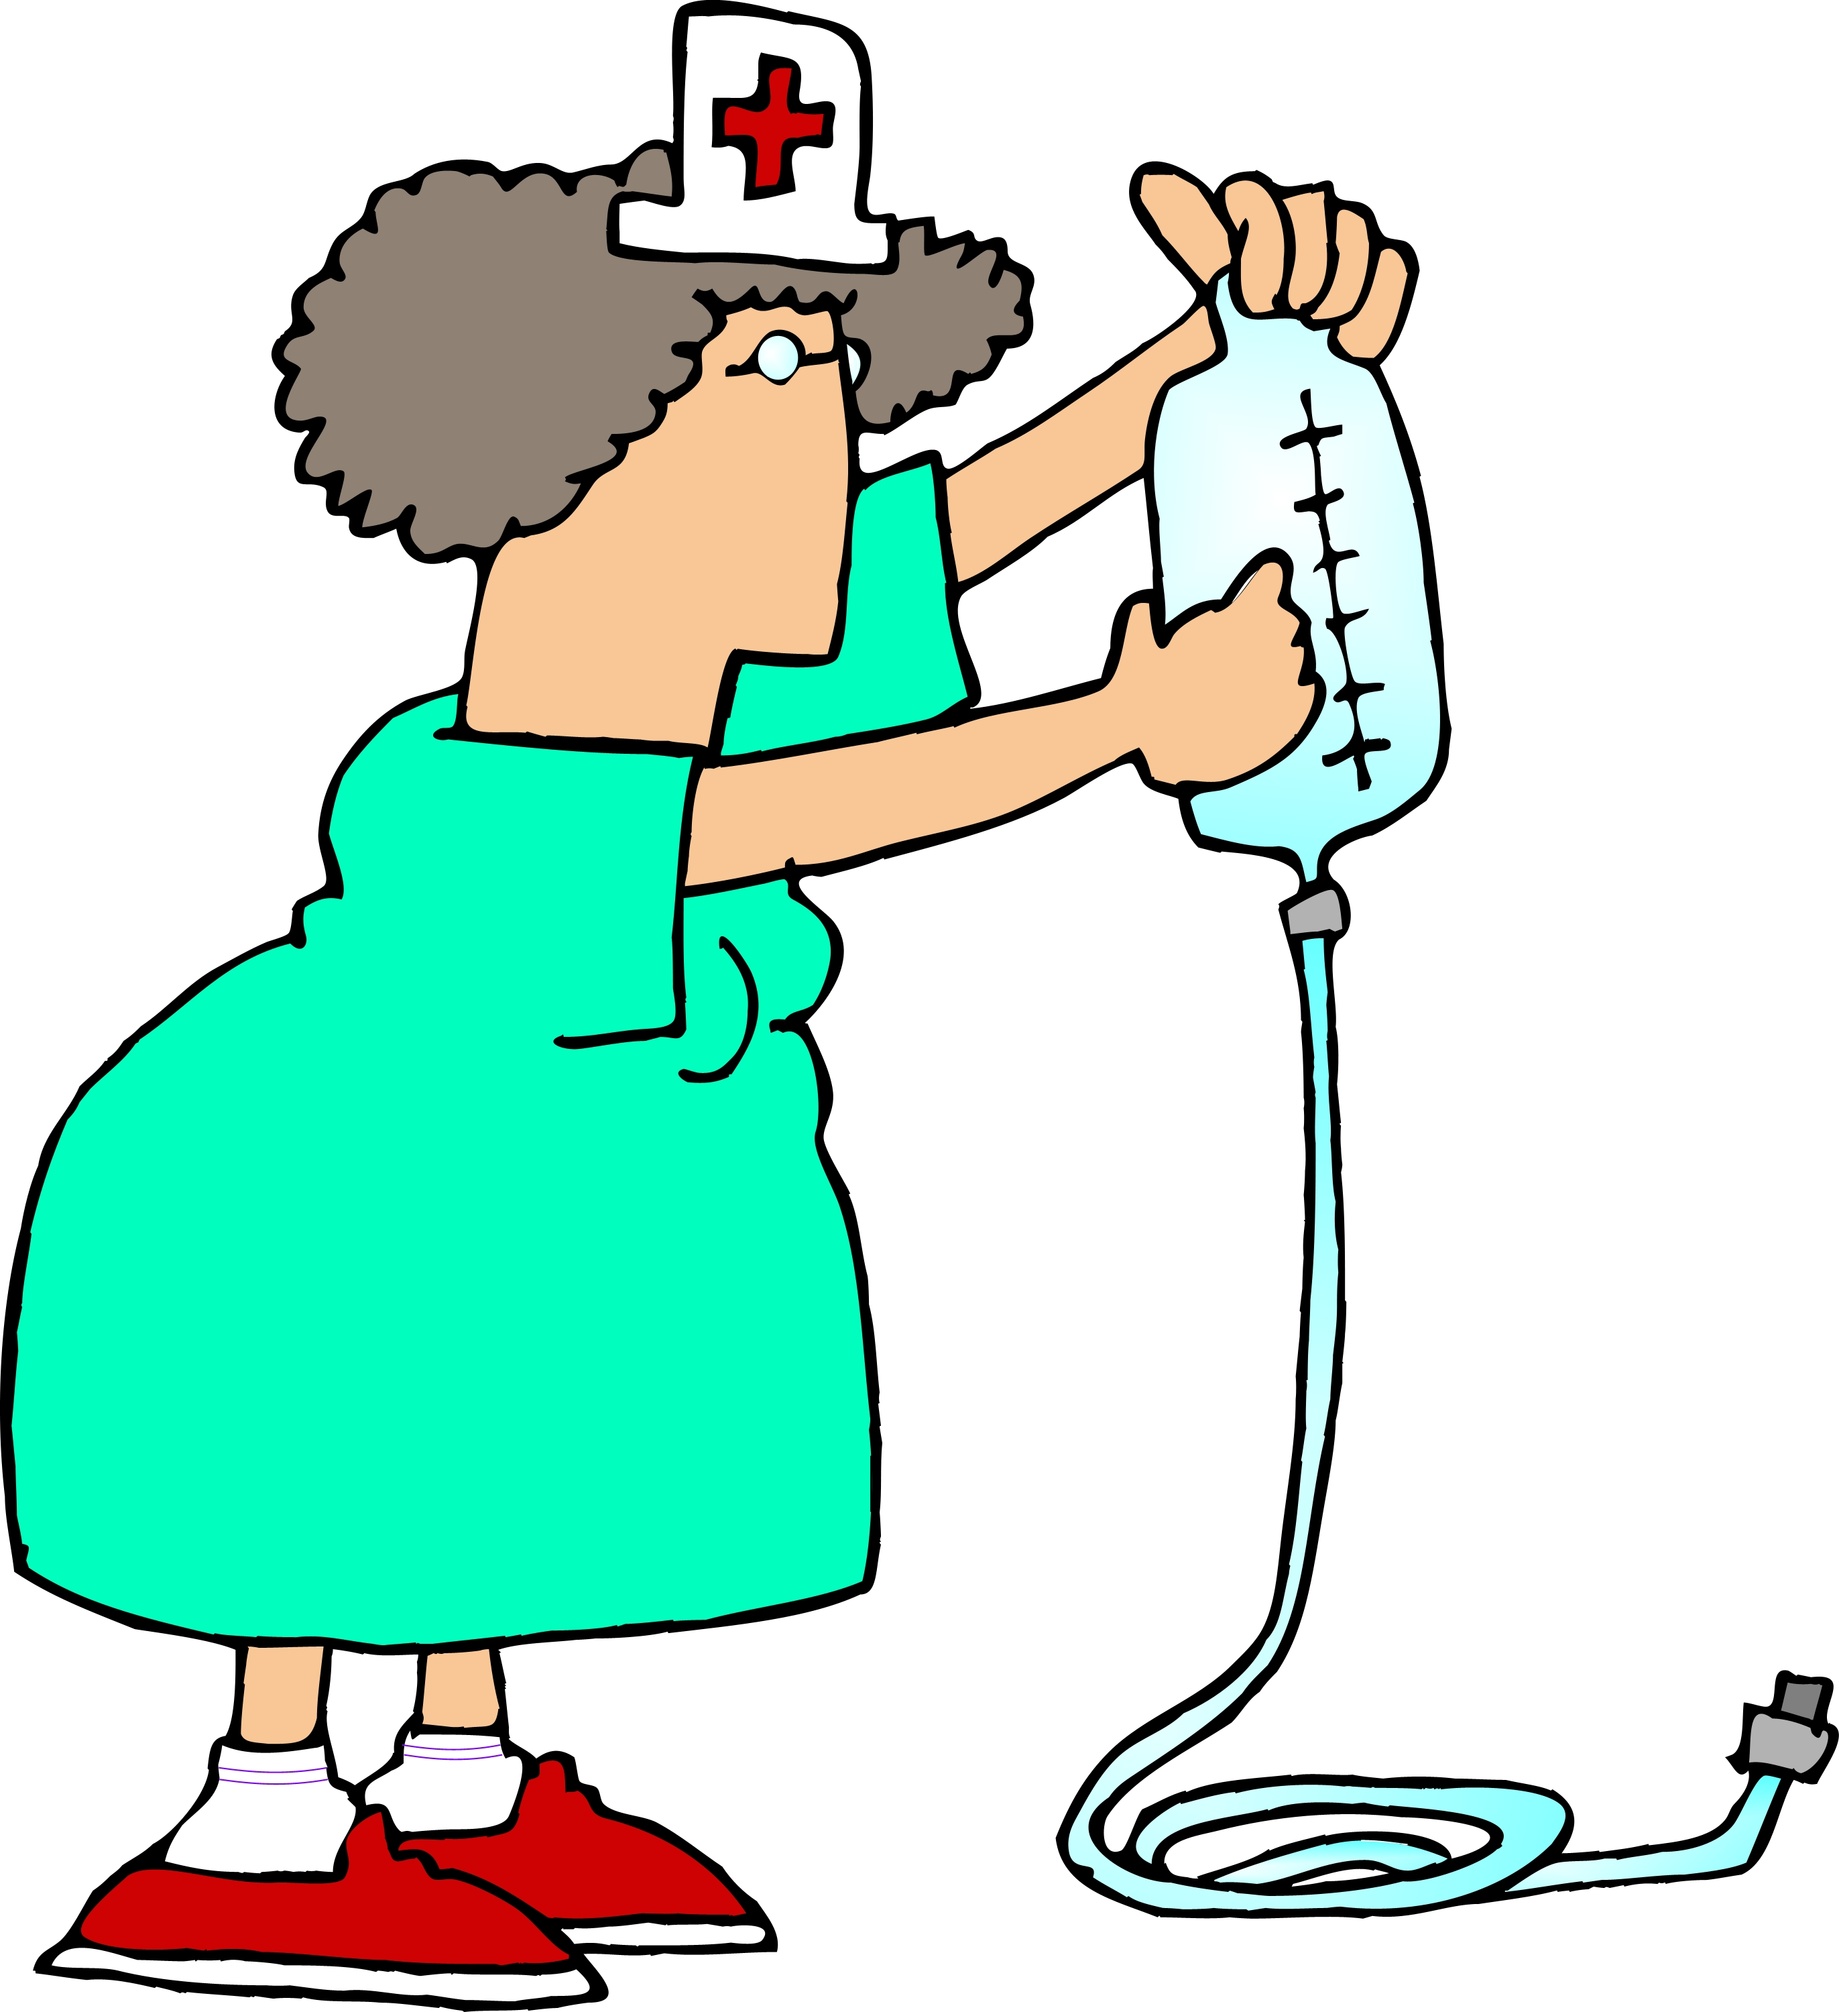 Nurse Walking Cartoon : Various formats from 240p to 720p hd (or even ...